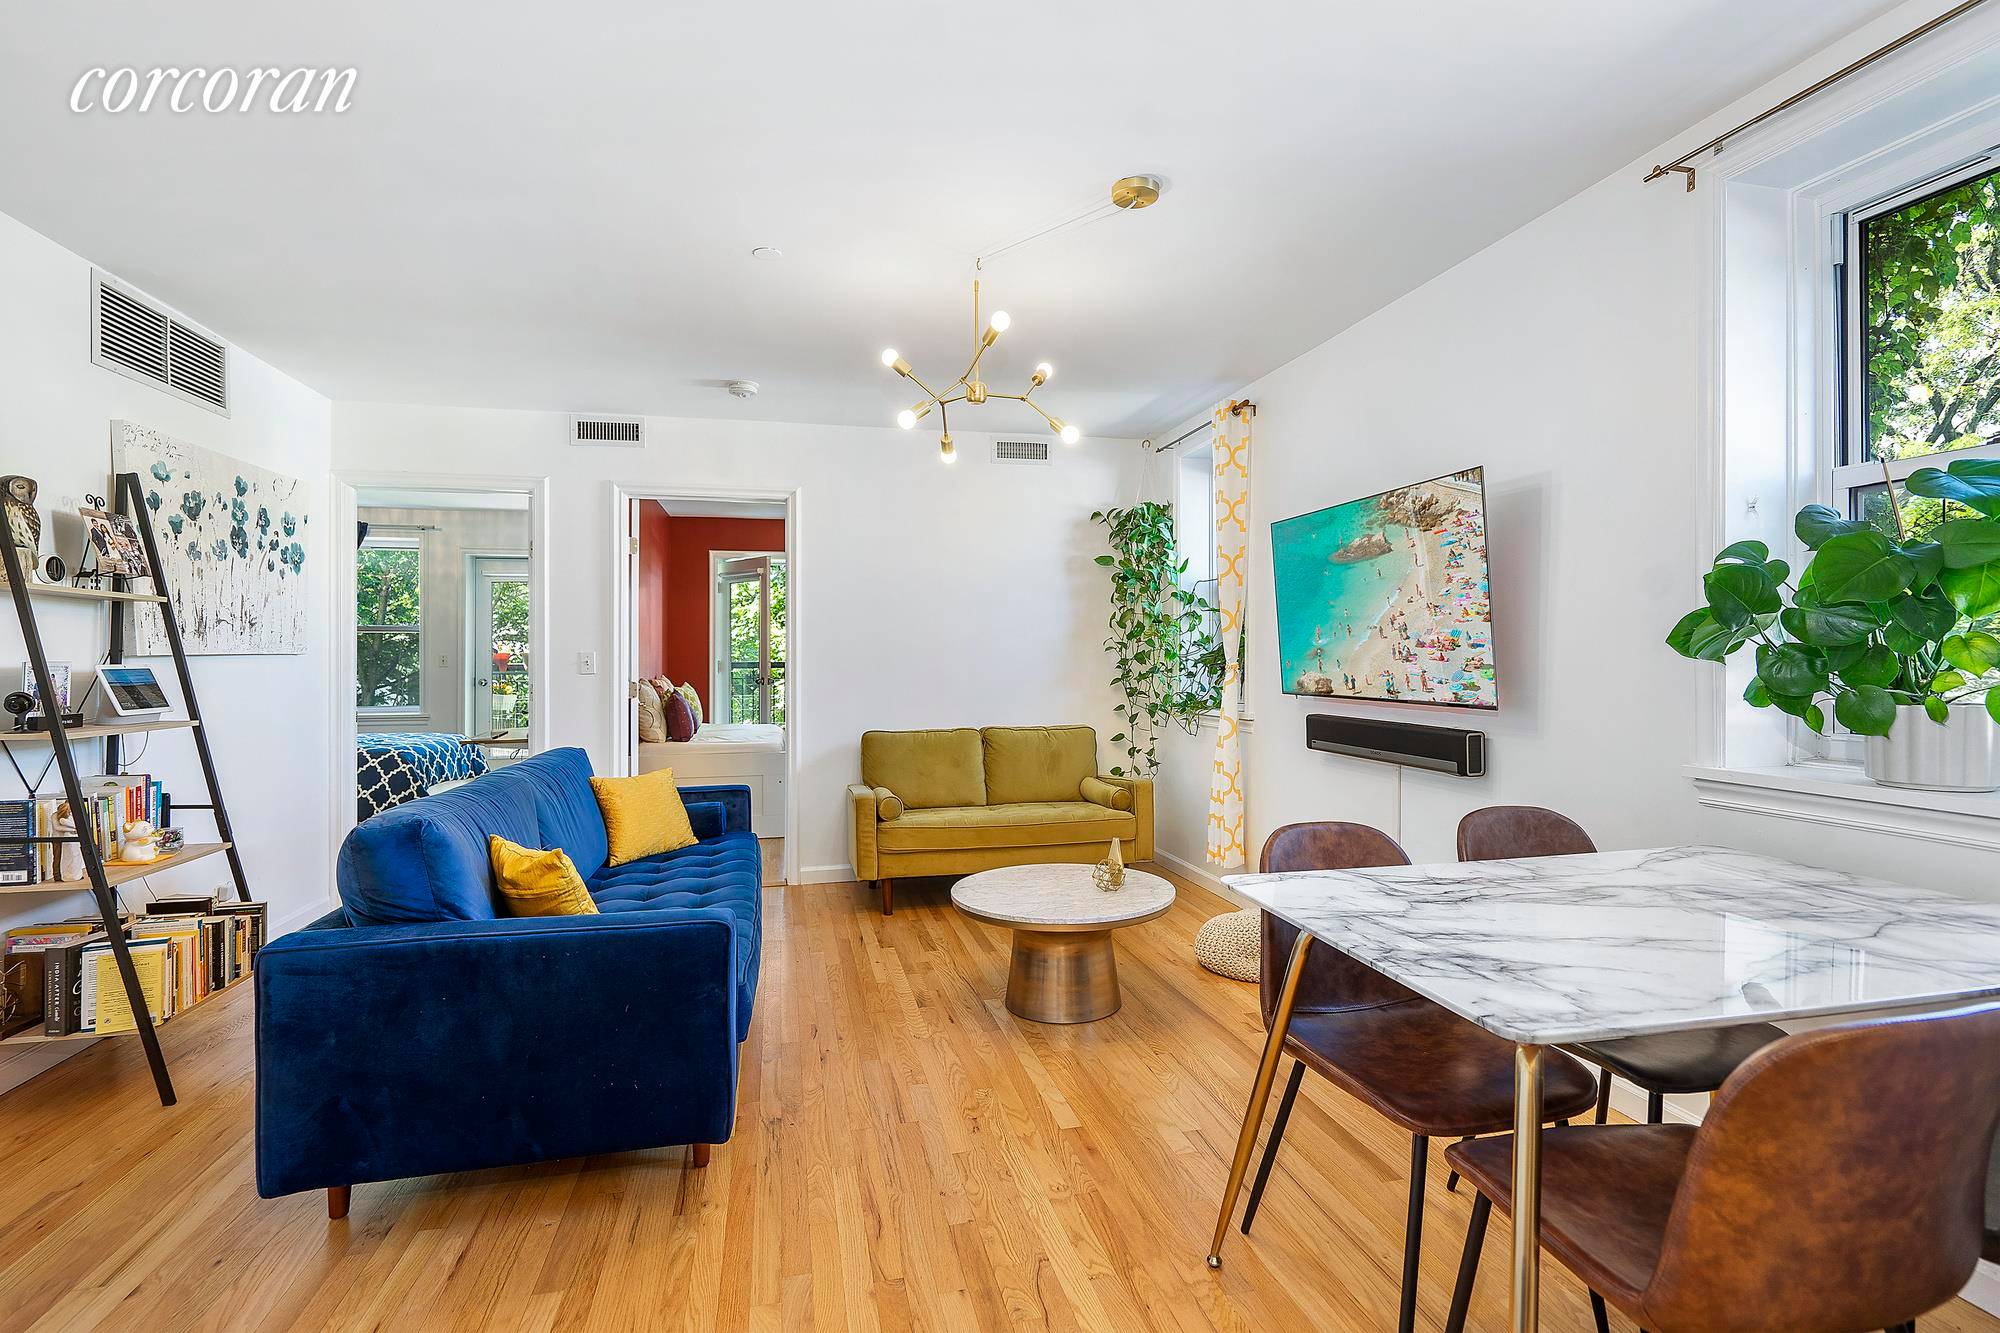 NEW TO THE MARKET ! ! Welcome home to this light filled, bright and airy, 2bed 2bath spacious condo in lovely Park Slope !